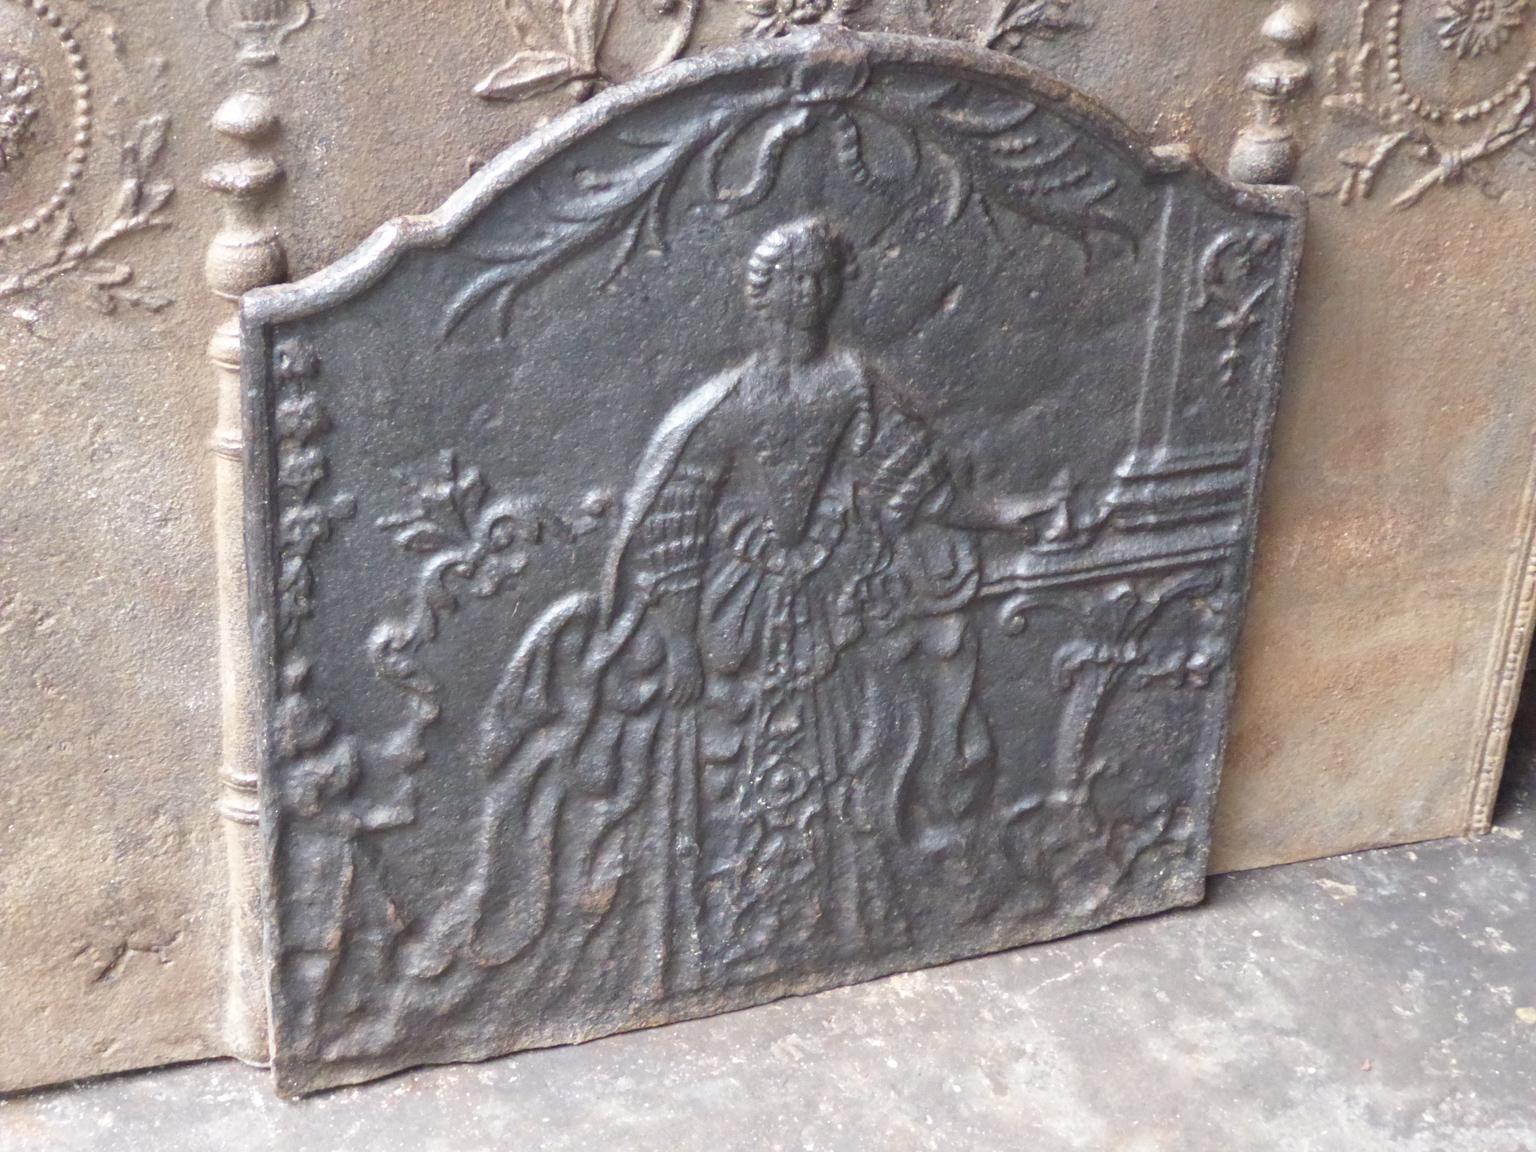 19th century French Louis XV style fireback with Marie Leszczynska, queen of France and wife of king Louis XV. The fireback is made of cast iron and has a natural brown patina. Upon request it can be made black / pewter. The condition is good, there